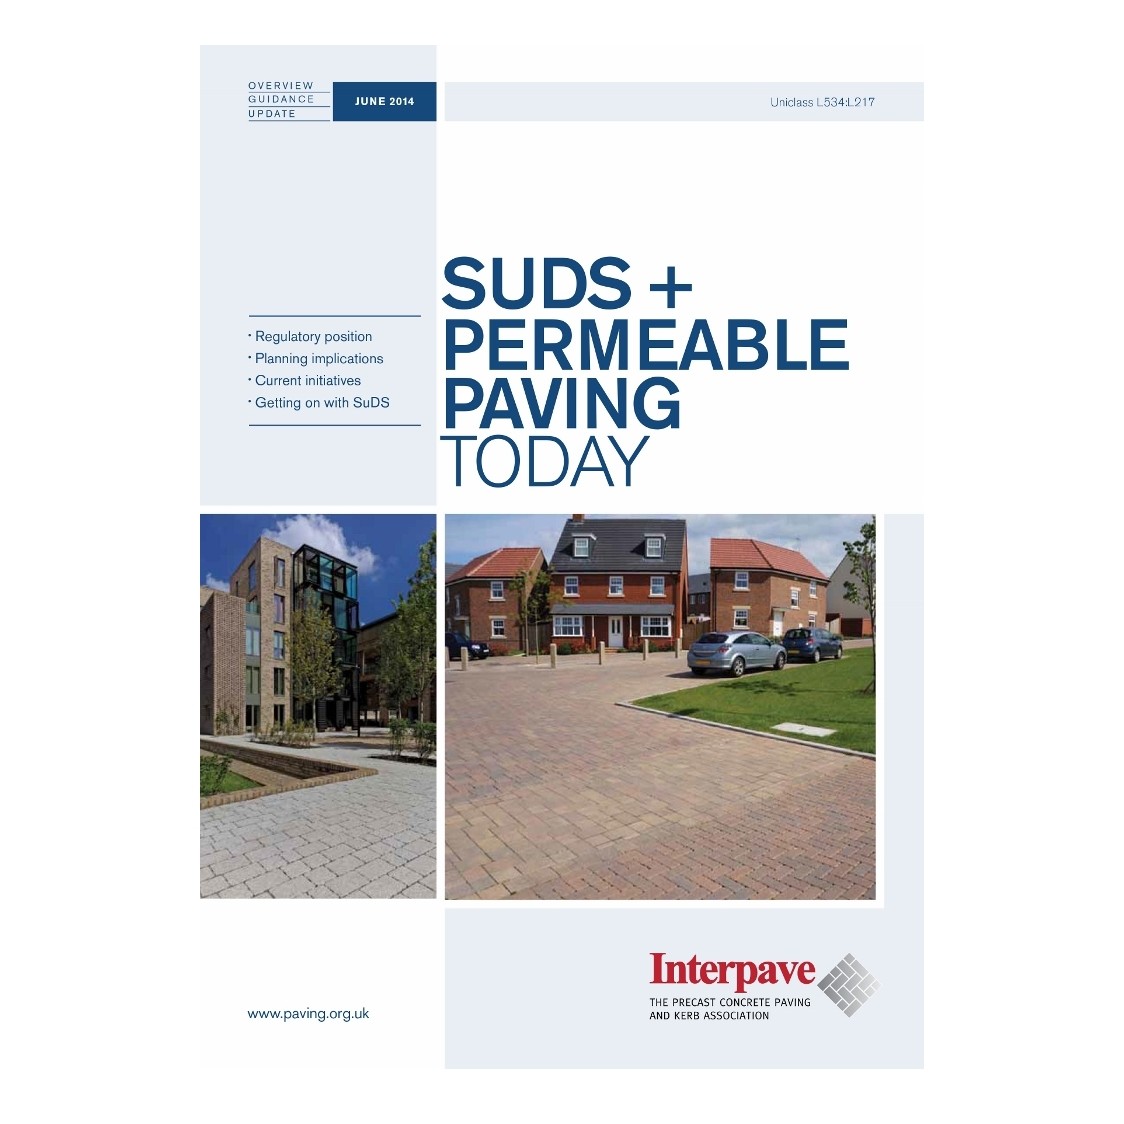 A new direction for SuDS